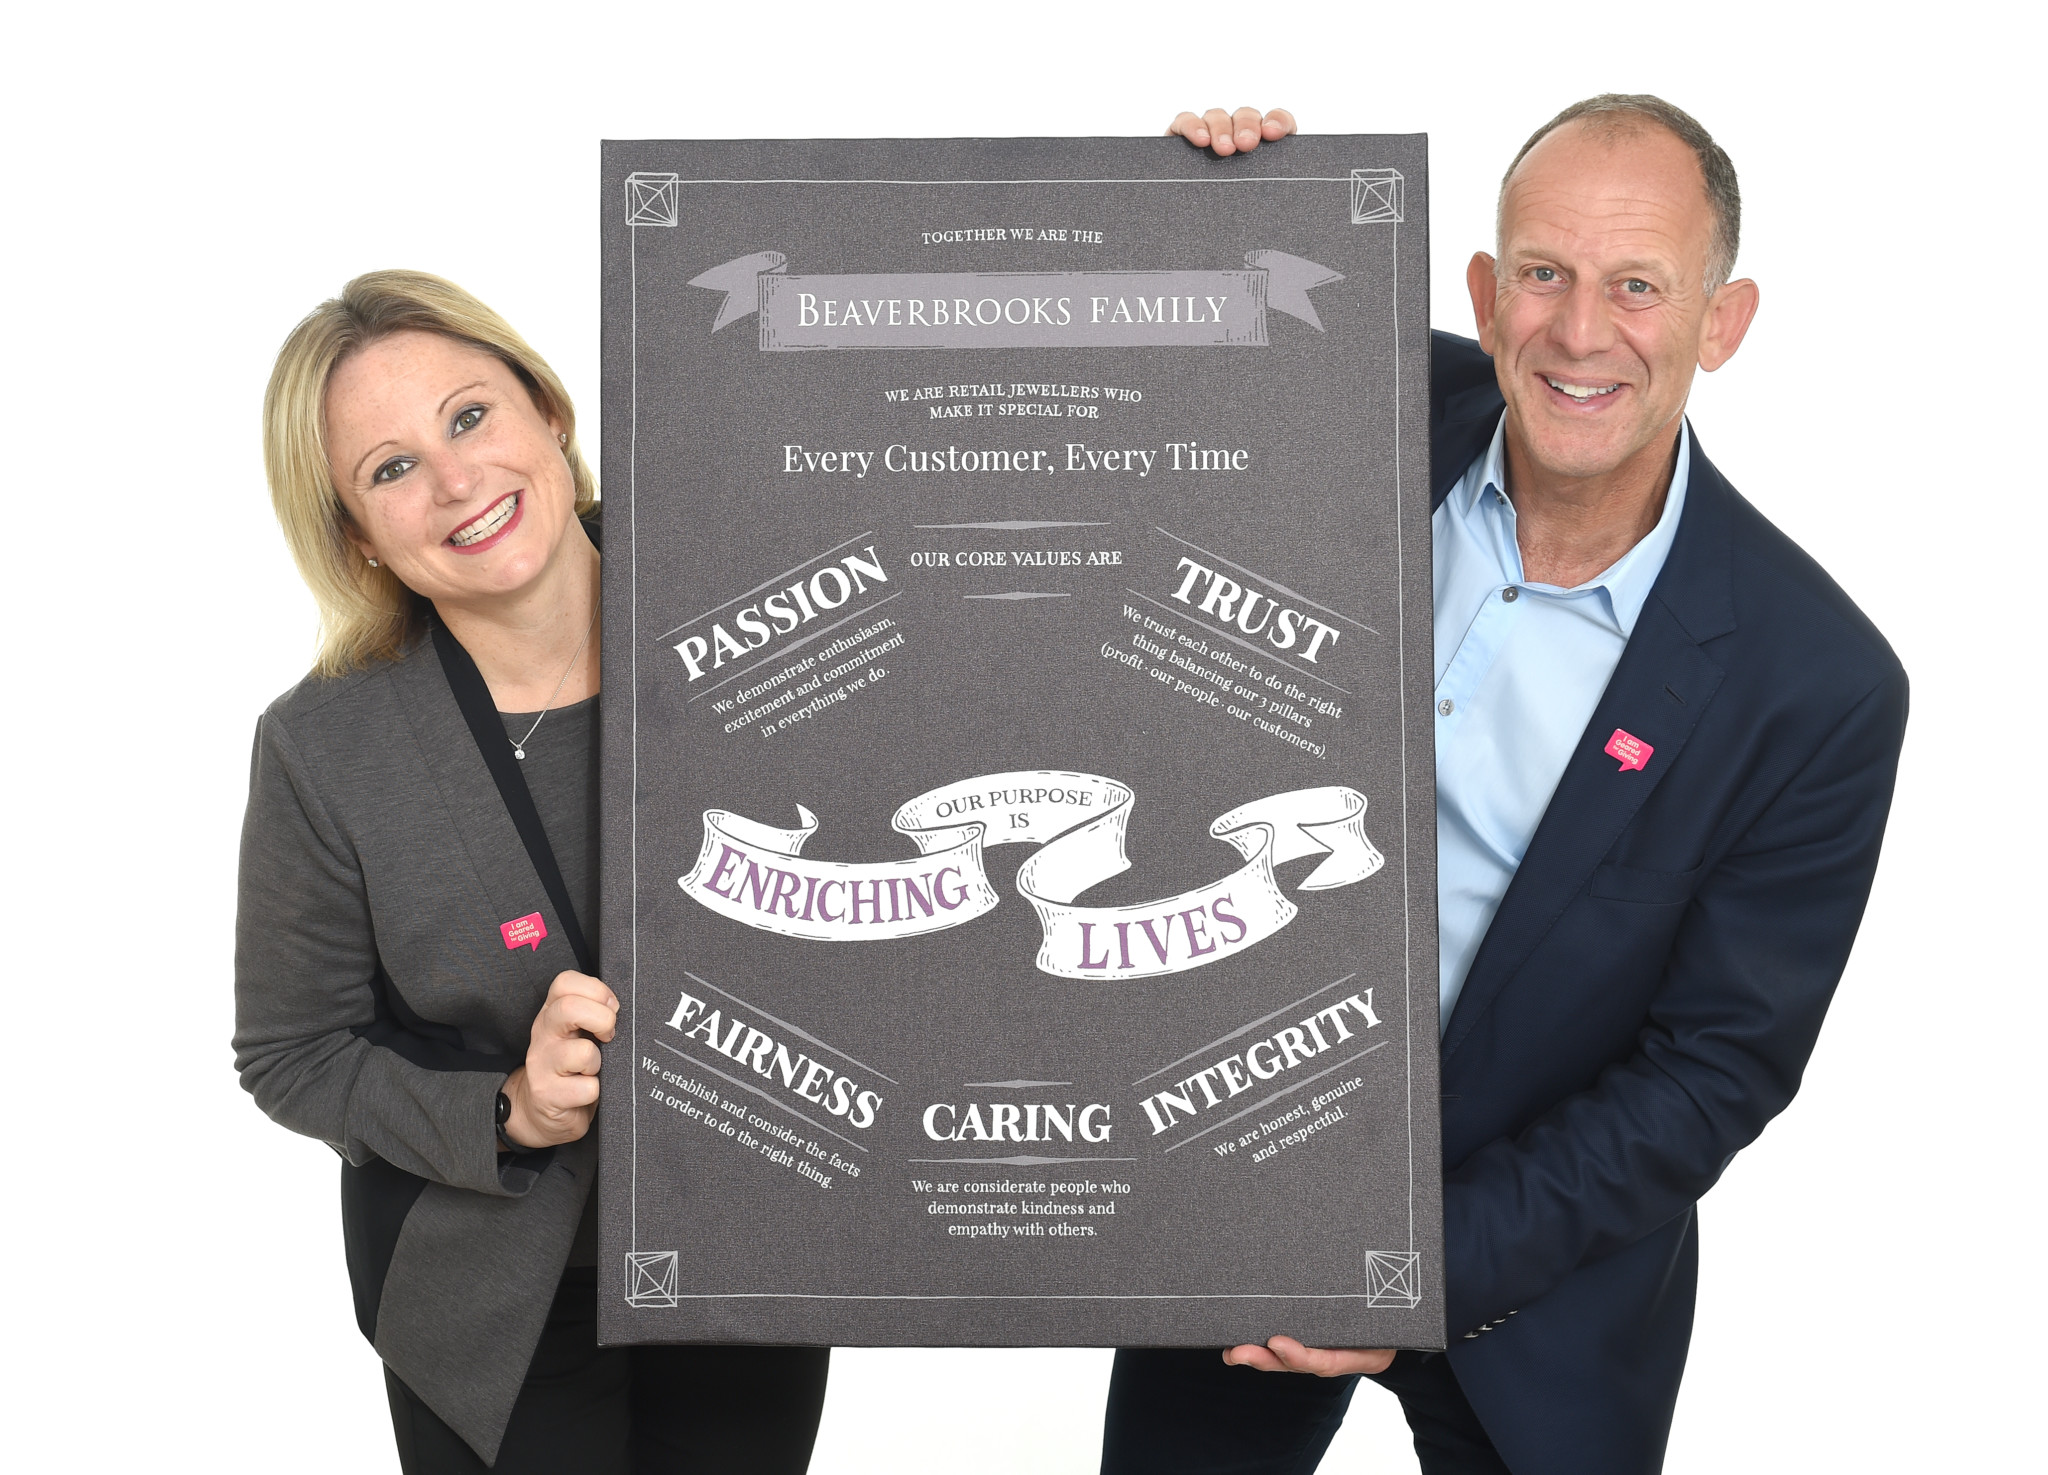 Anna blackburn and mark adlestone stand behind the companys core values of passion, trust, fairness and integrity.